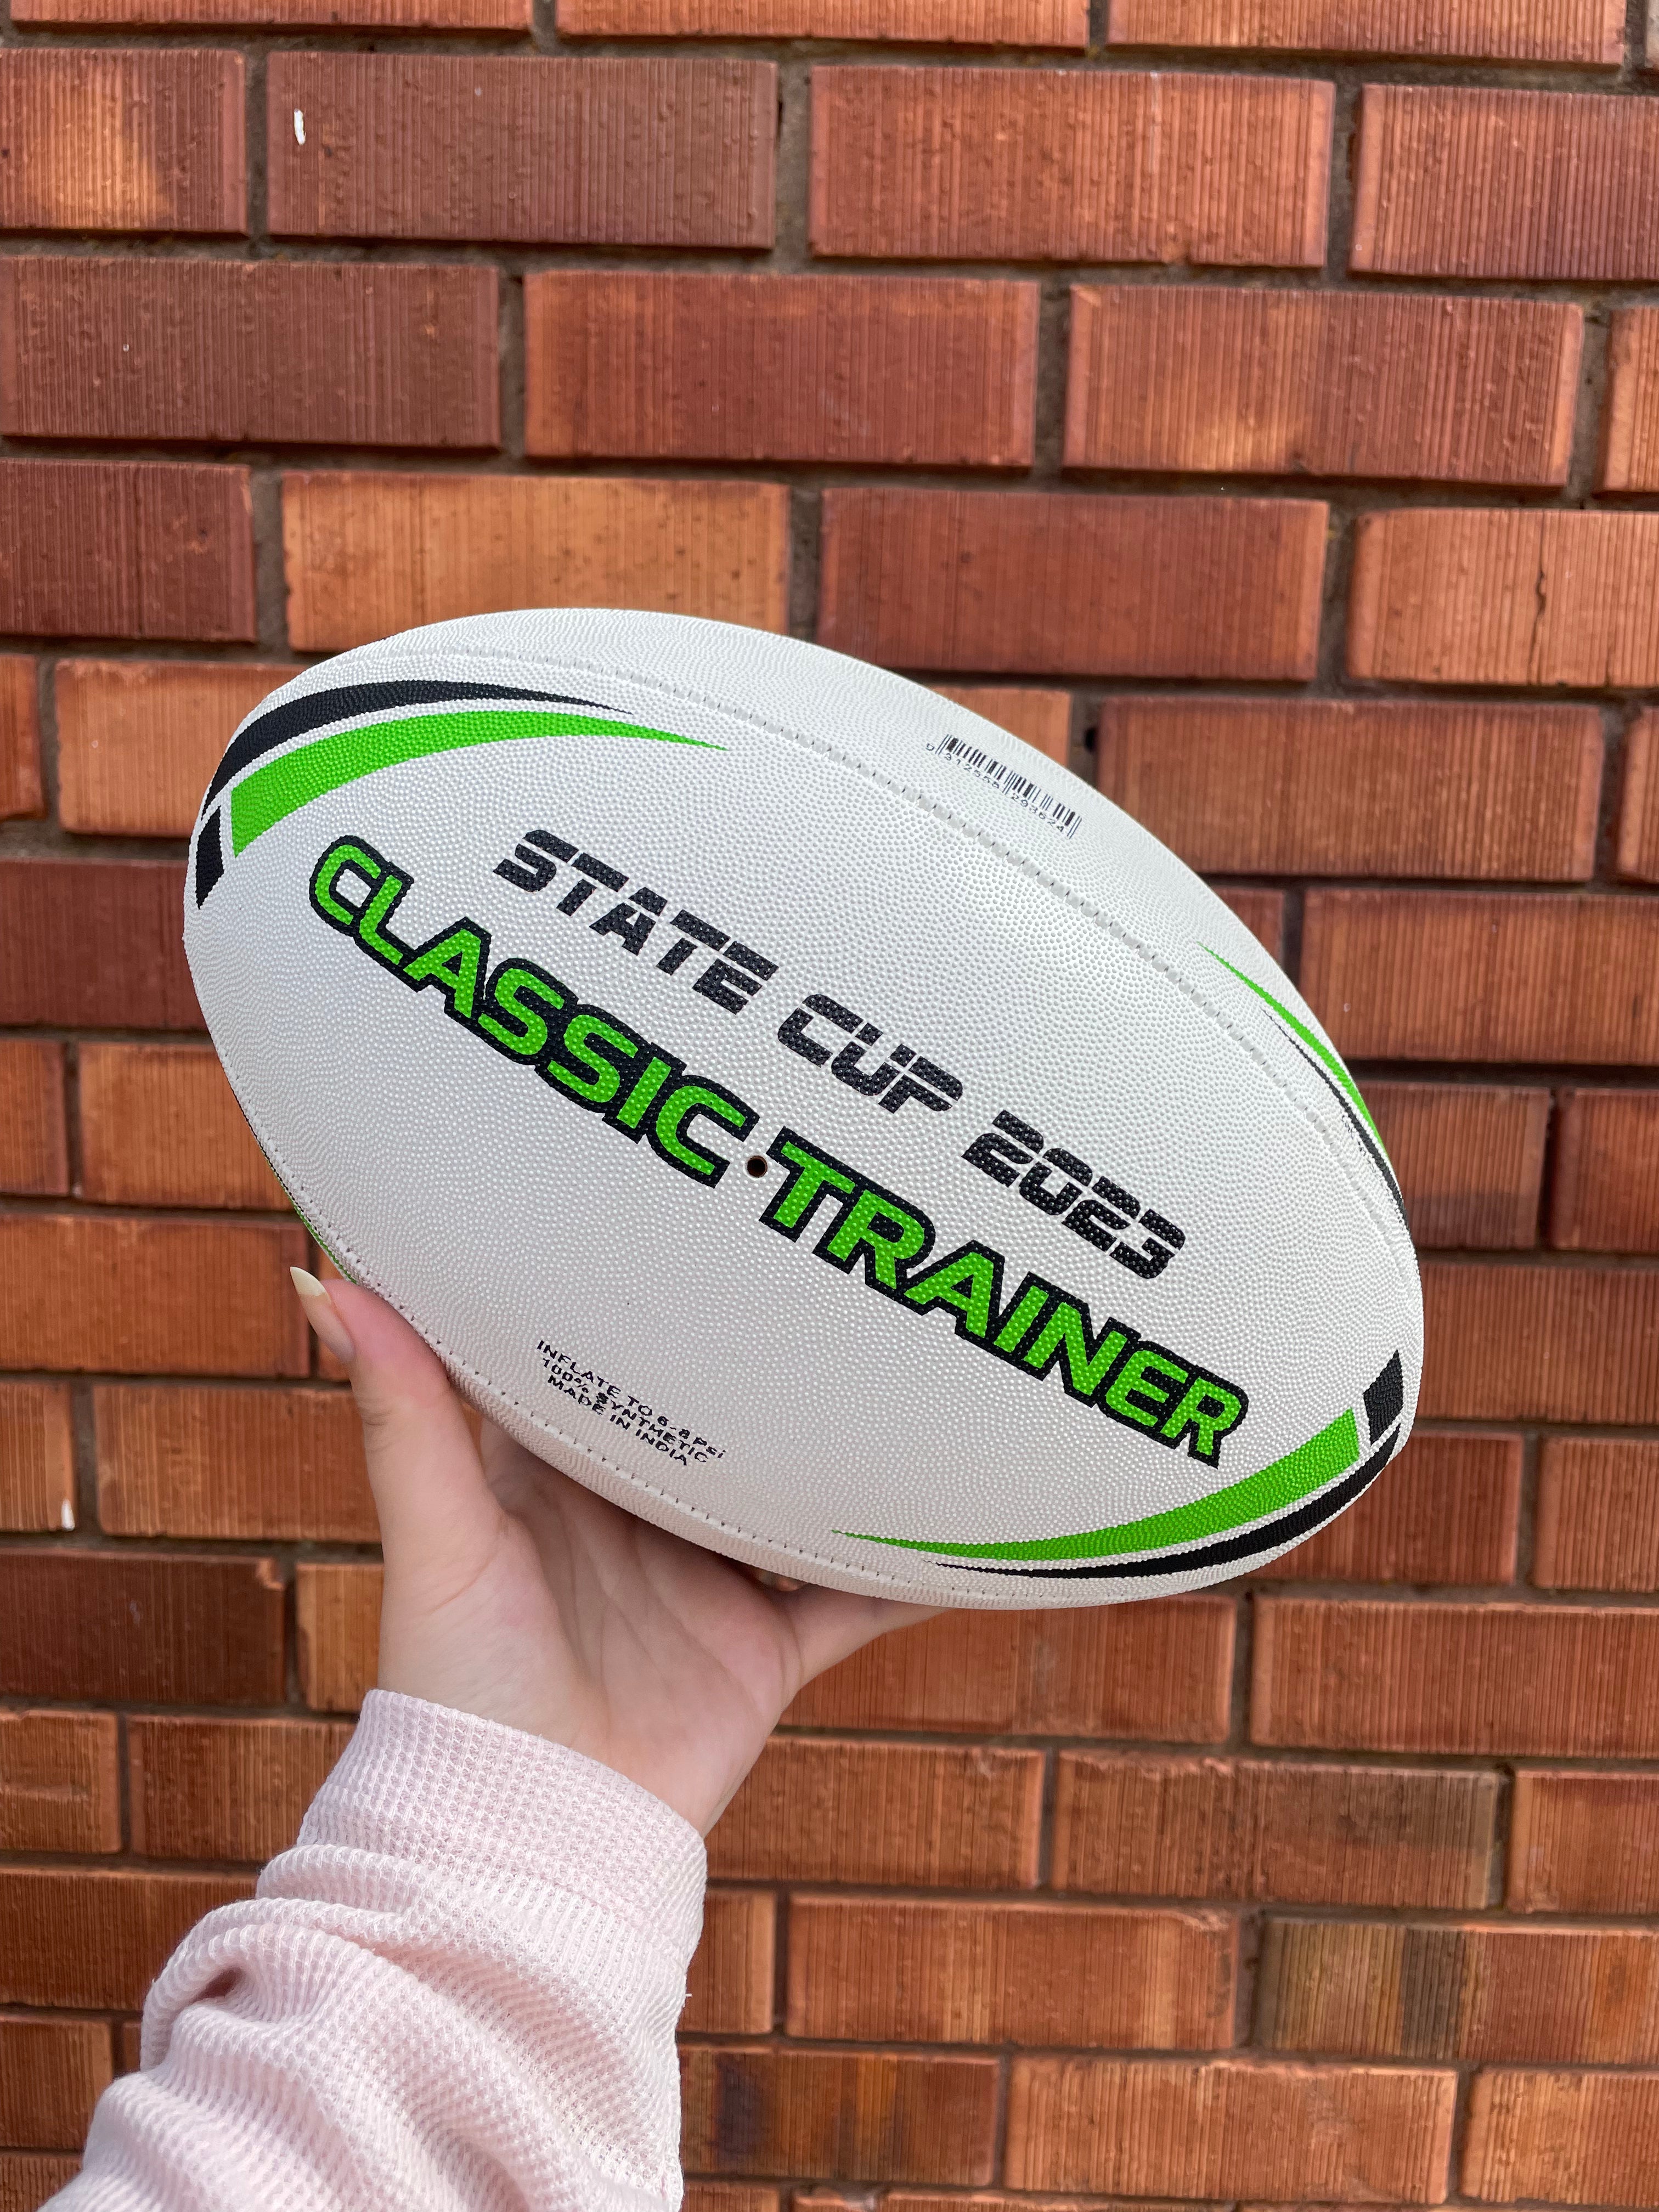 Personalised White Steeden Rugby League (size 5)